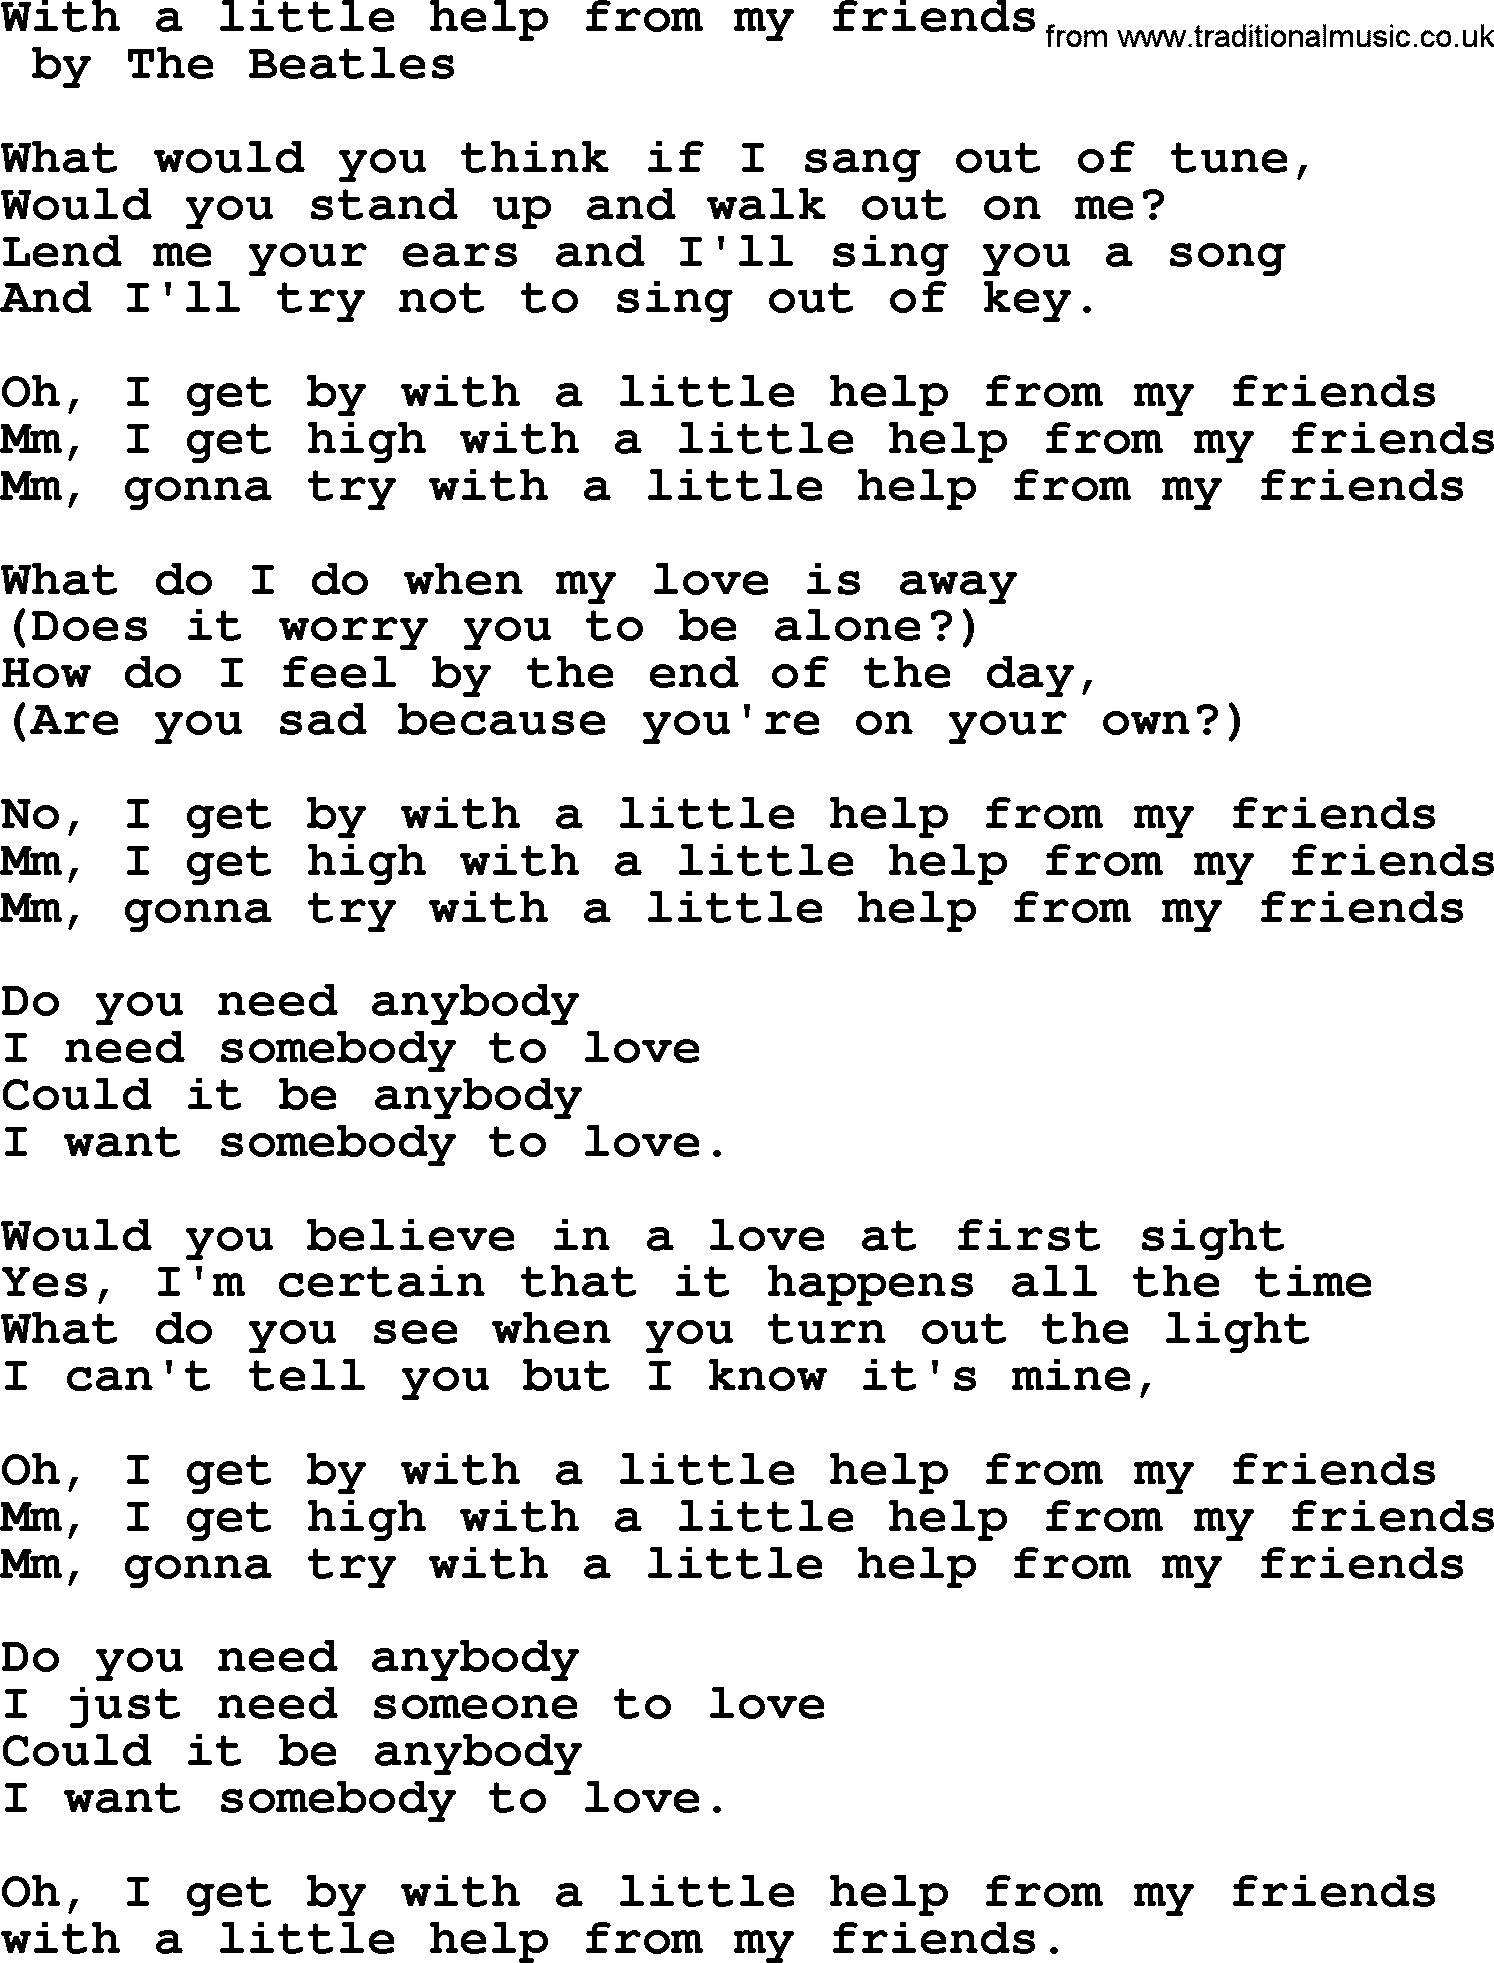 Bruce Springsteen song: With A Little Help From My Friends lyrics